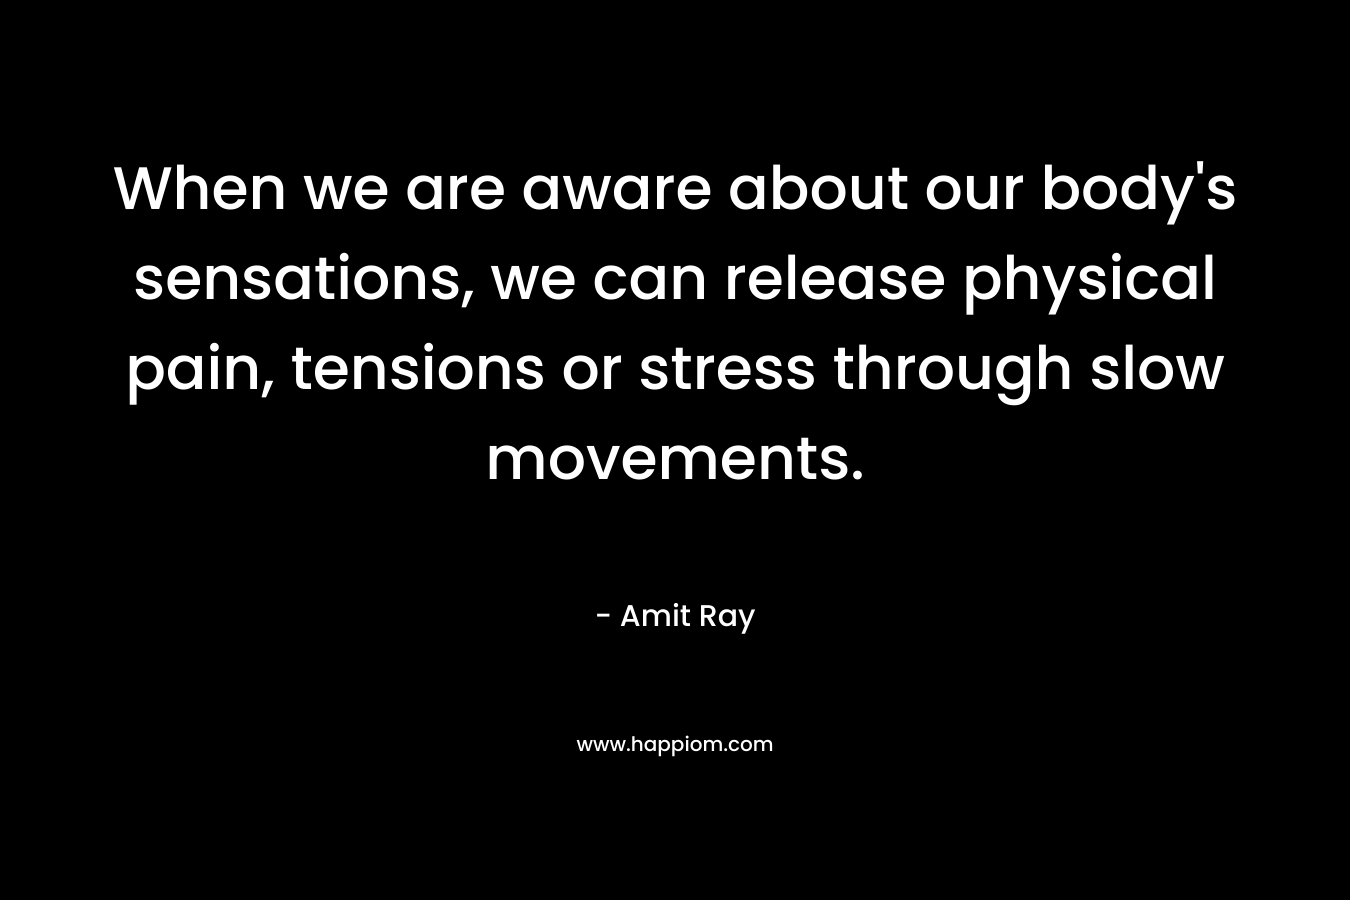 When we are aware about our body’s sensations, we can release physical pain, tensions or stress through slow movements. – Amit Ray